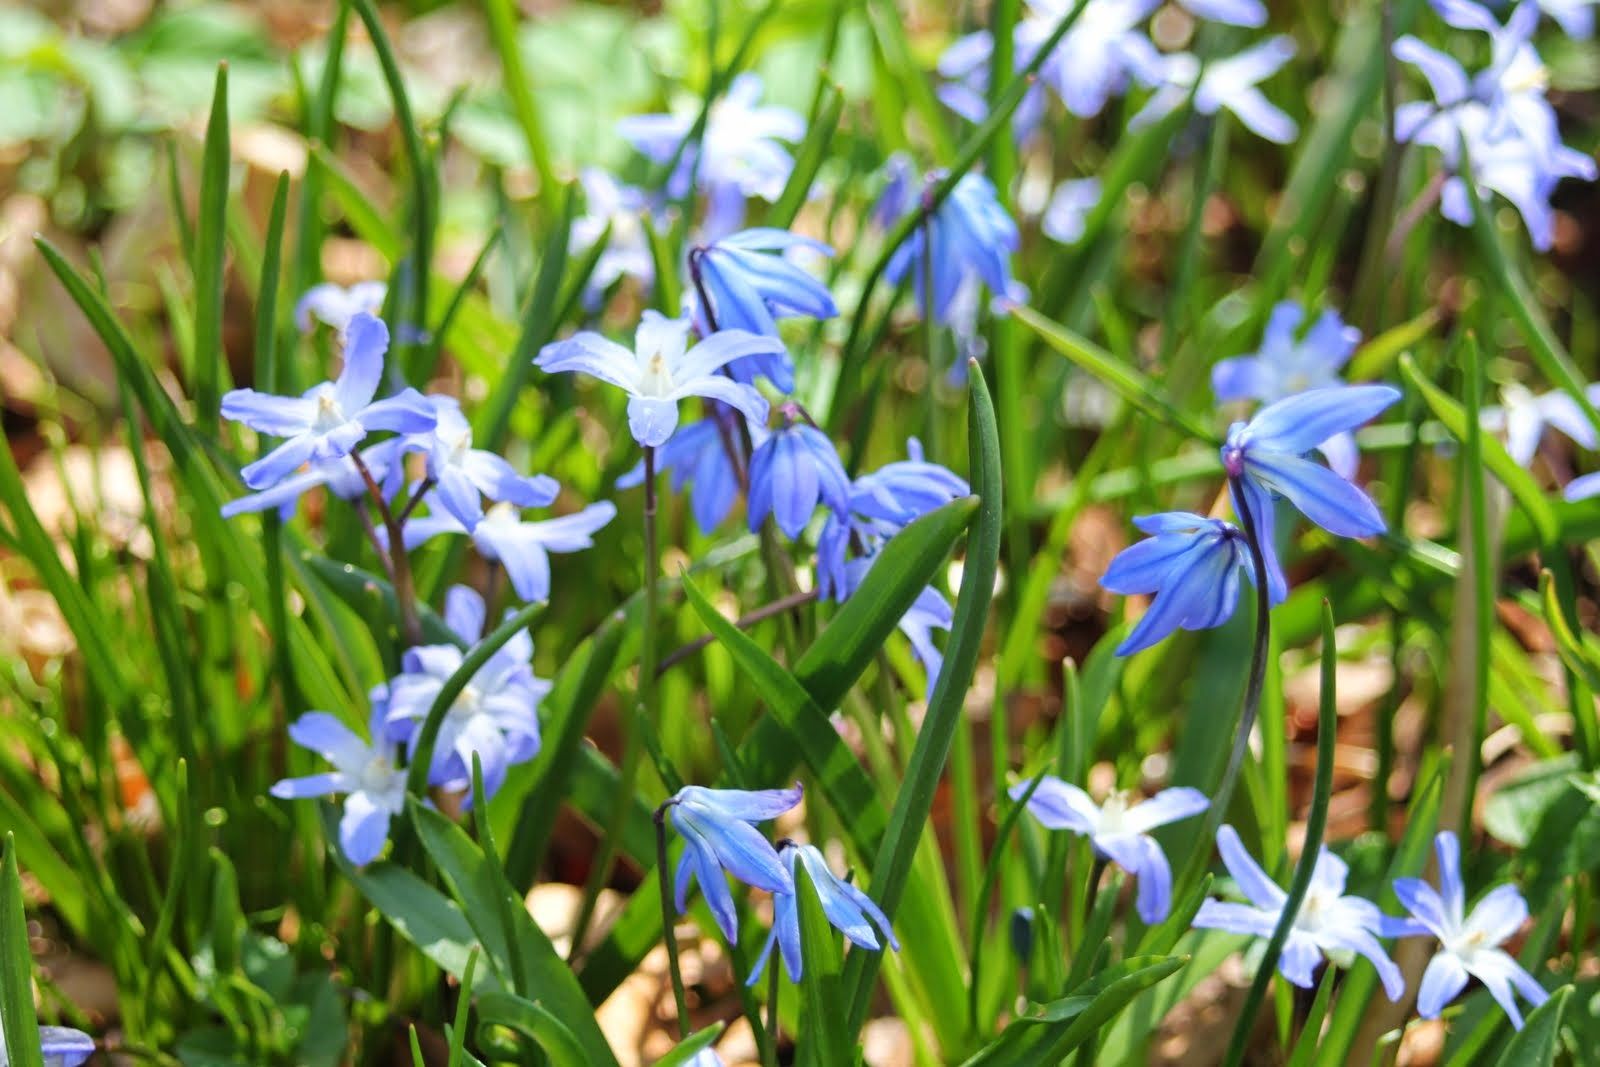 Blue Spring Flowers Image. Top Collection of different types of flowers in the image HD